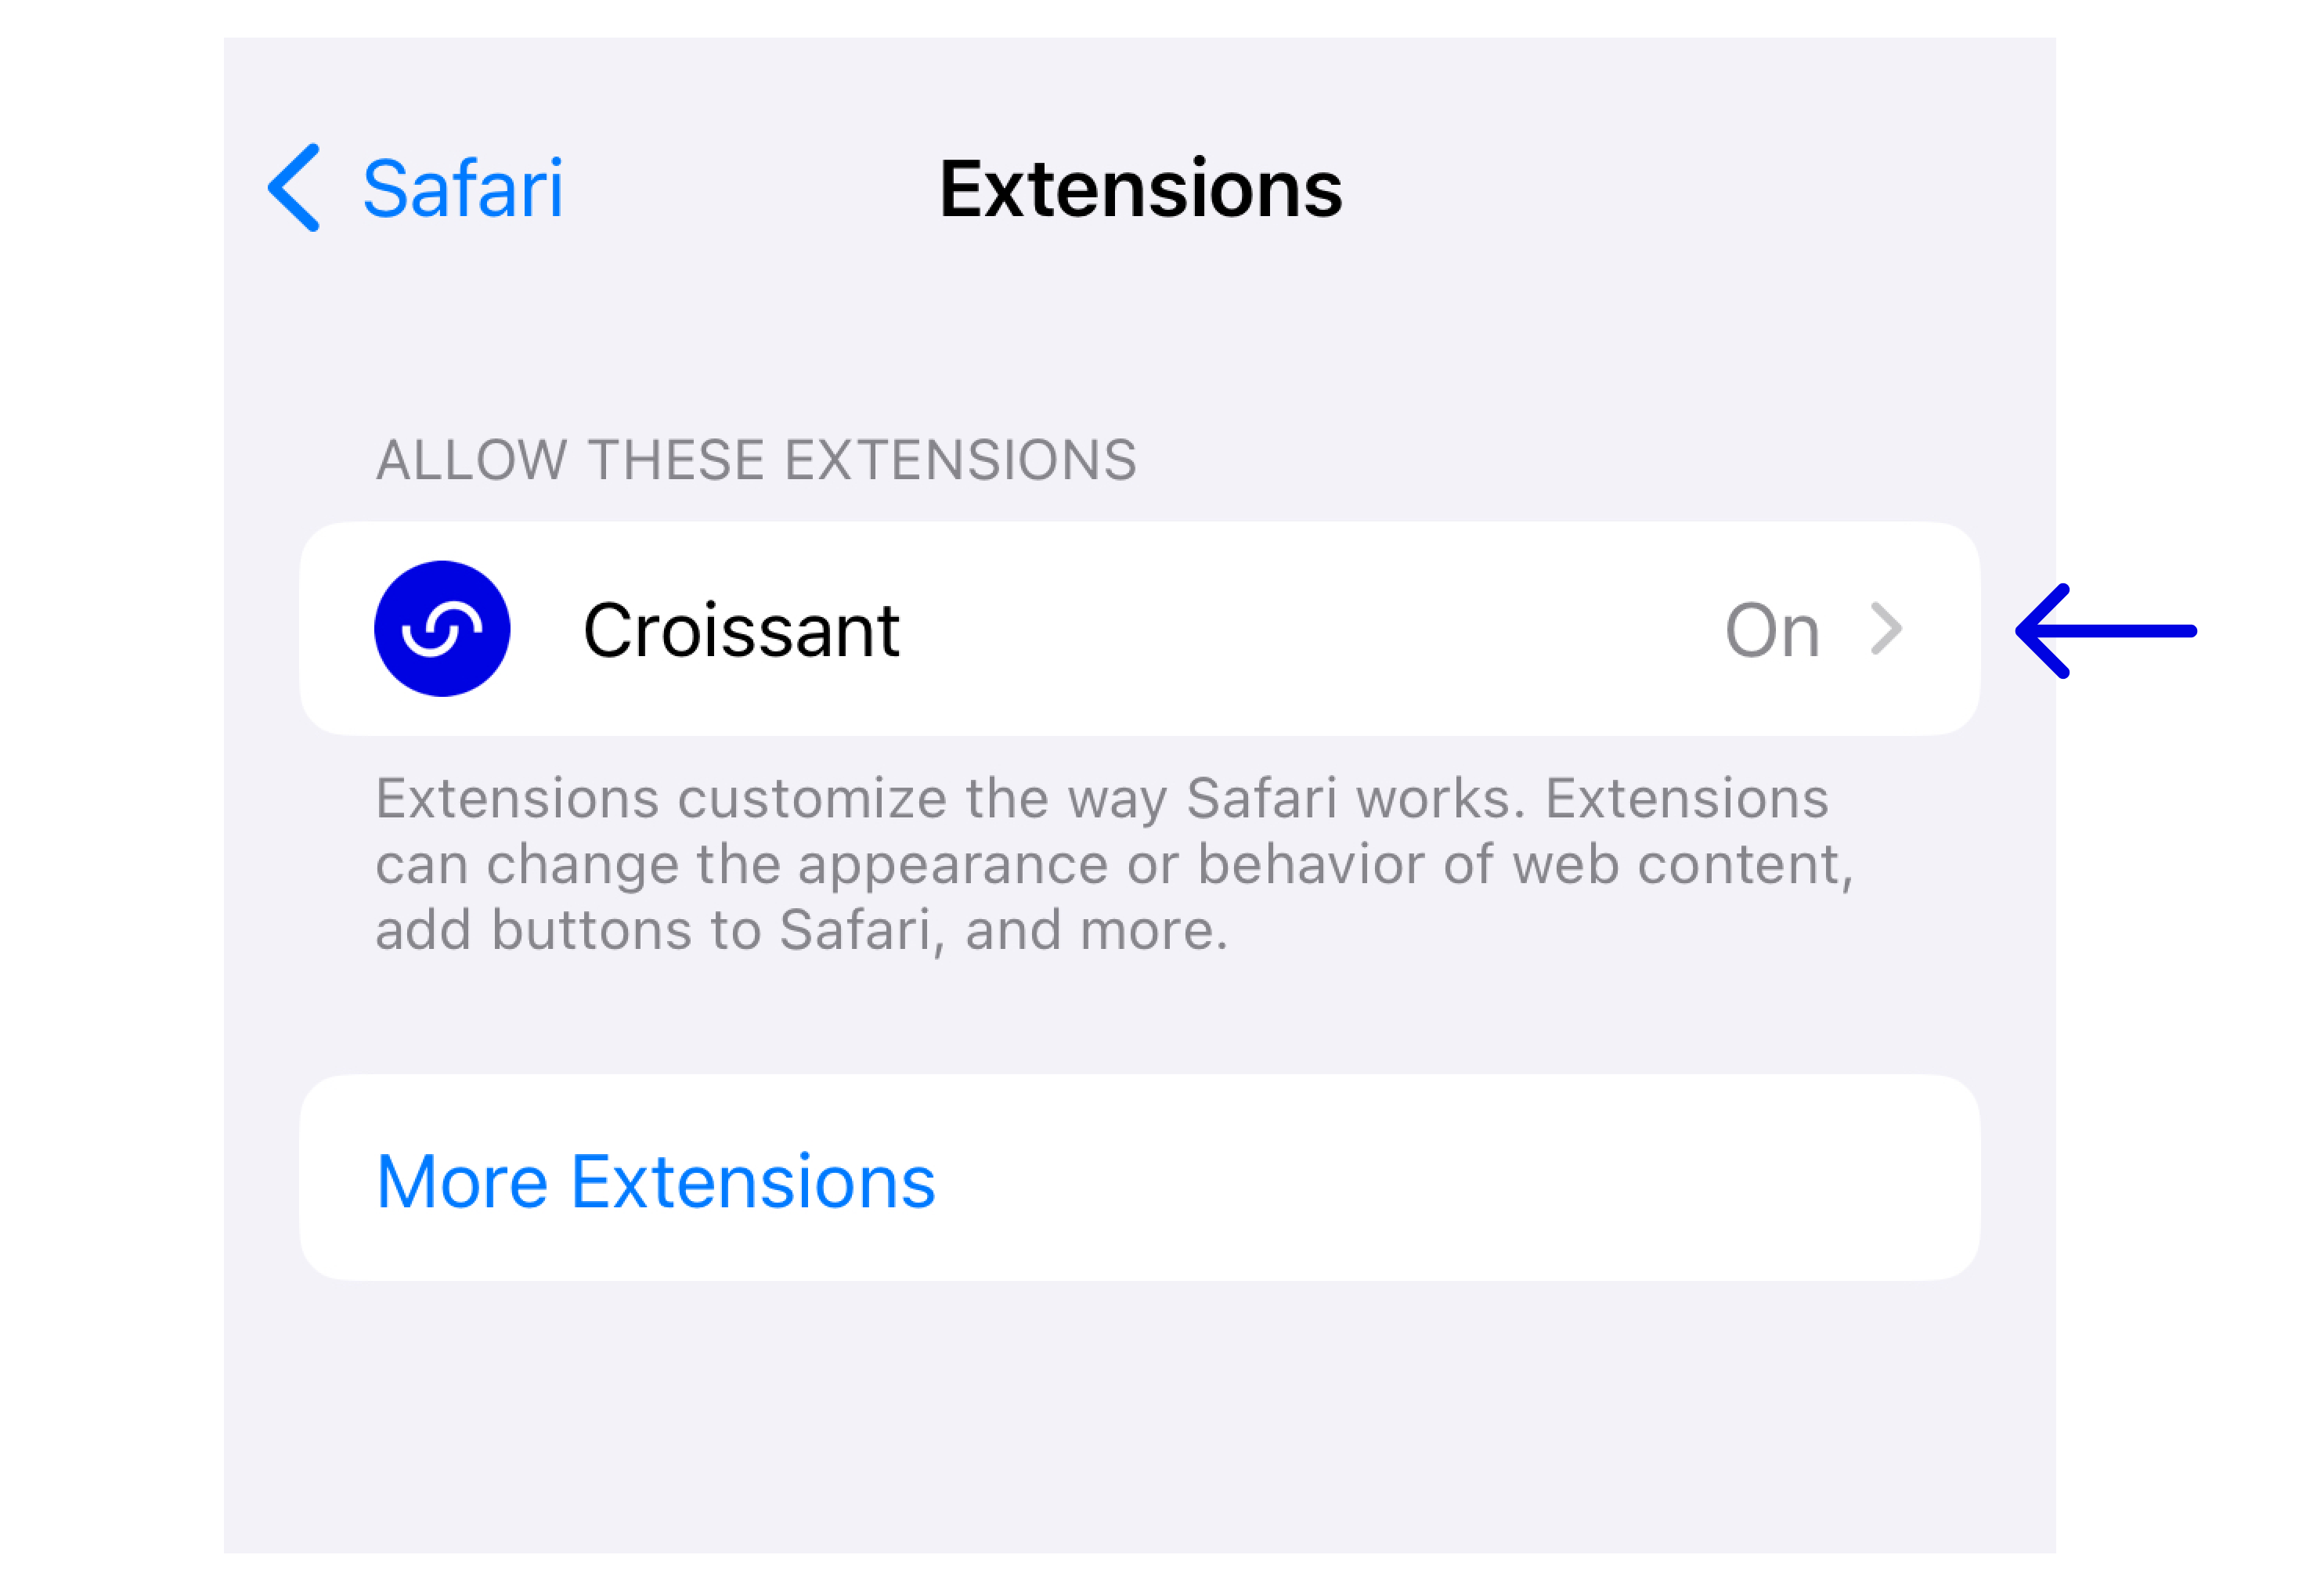 Croissant Extension permissions within the Safari extension settings.